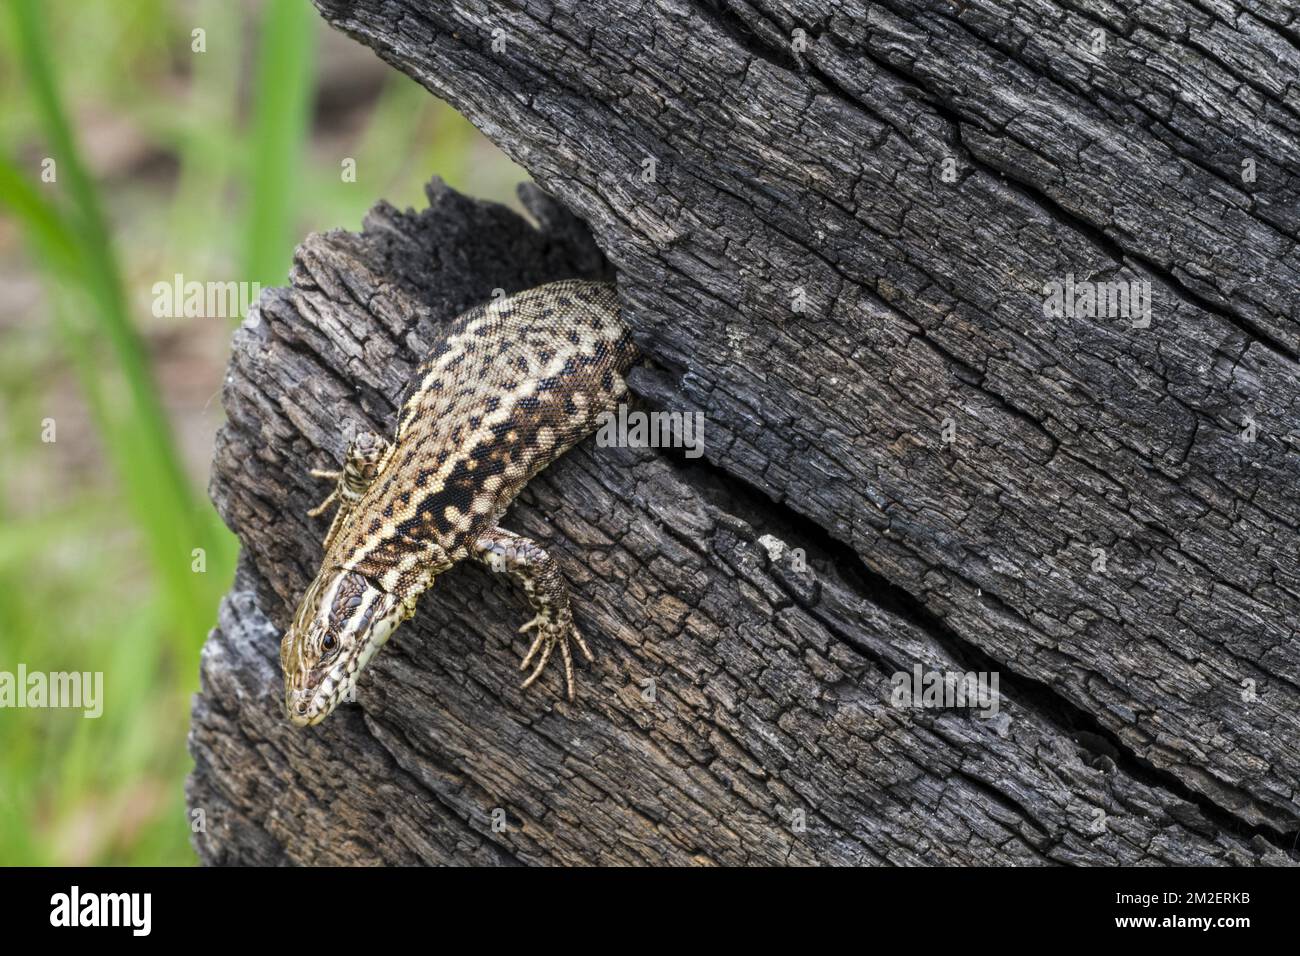 Common wall lizard (Podarcis muralis / Lacerta muralis) emerging from gap in scorched tree trunk | Lézard des murailles (Podarcis muralis) 23/04/2018 Stock Photo